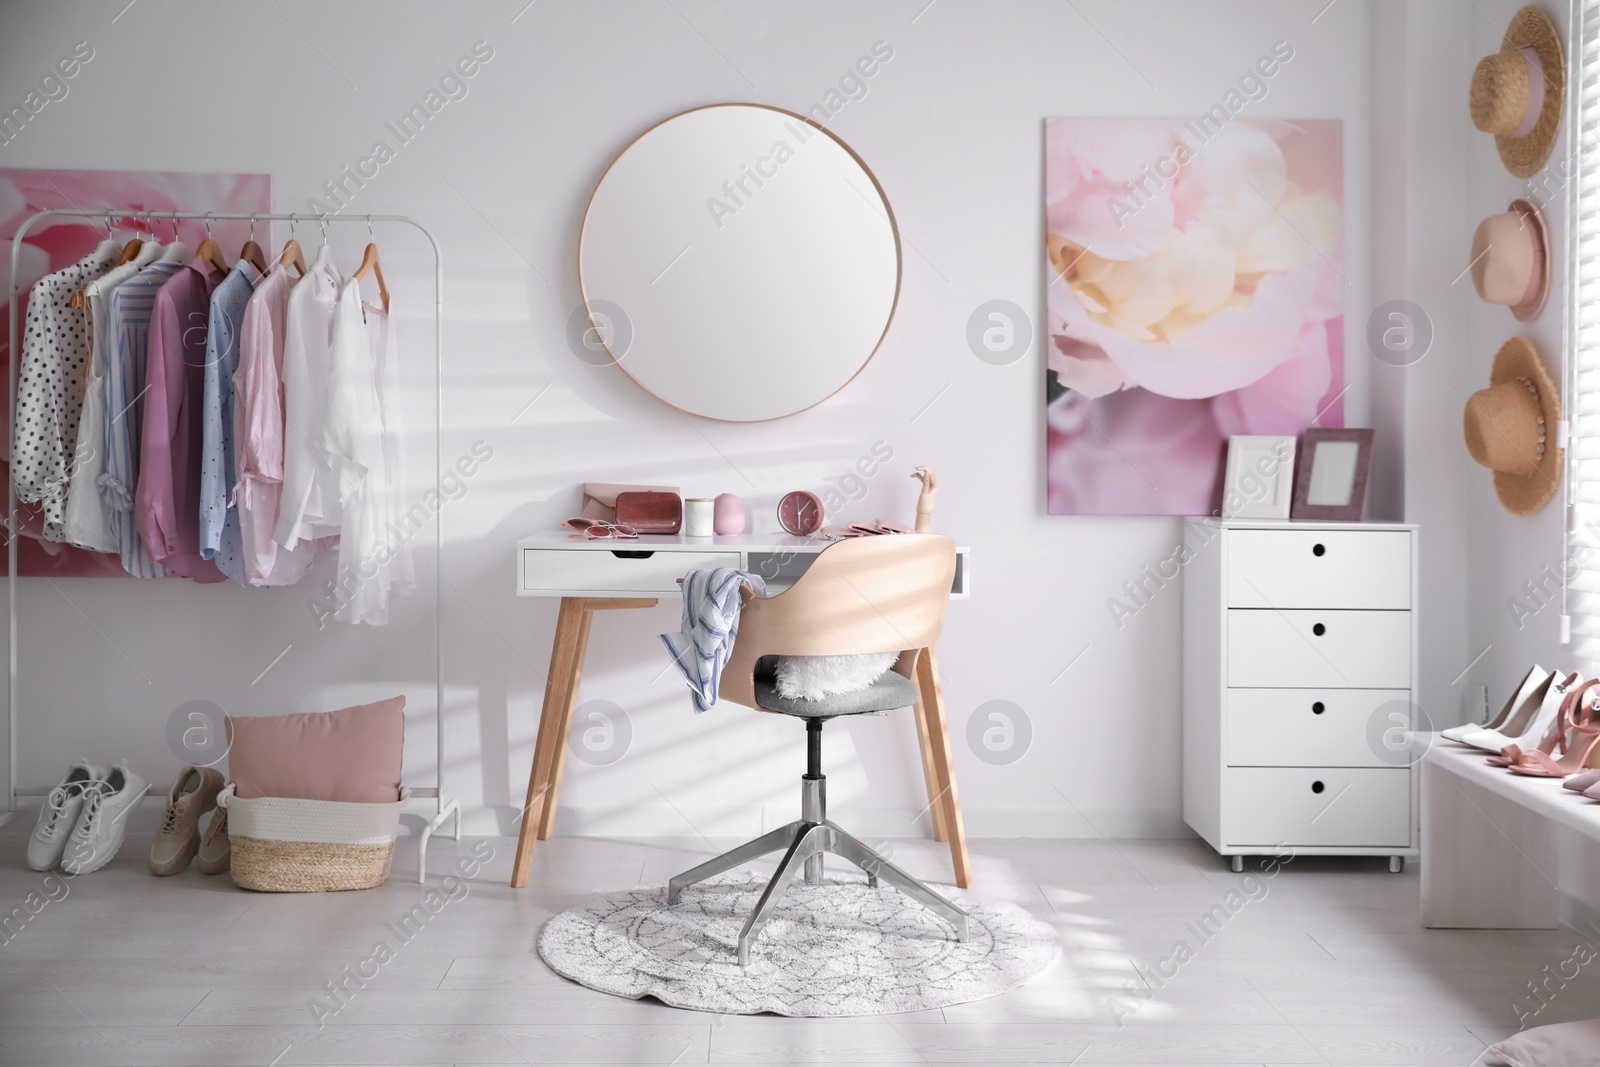 Photo of Dressing room interior with stylish makeup table, clothes and accessories